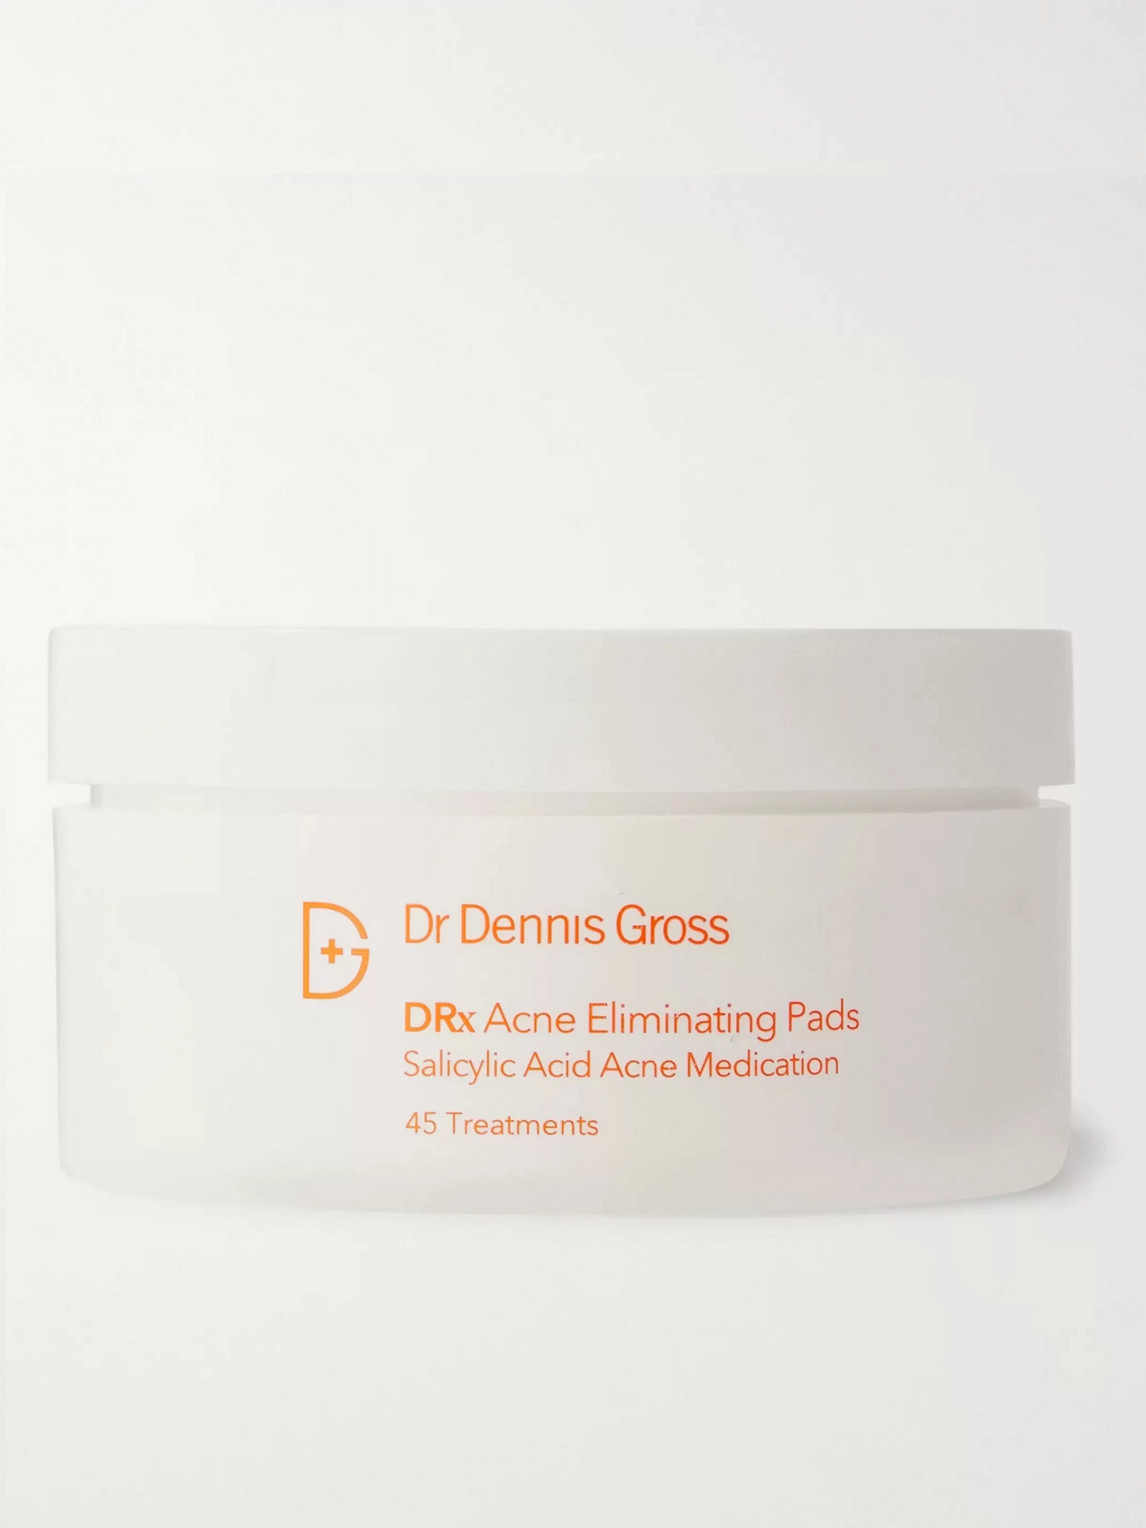 Dr Dennis Gross Skincare Drx Acne Eliminating Pads X 45 In Colorless